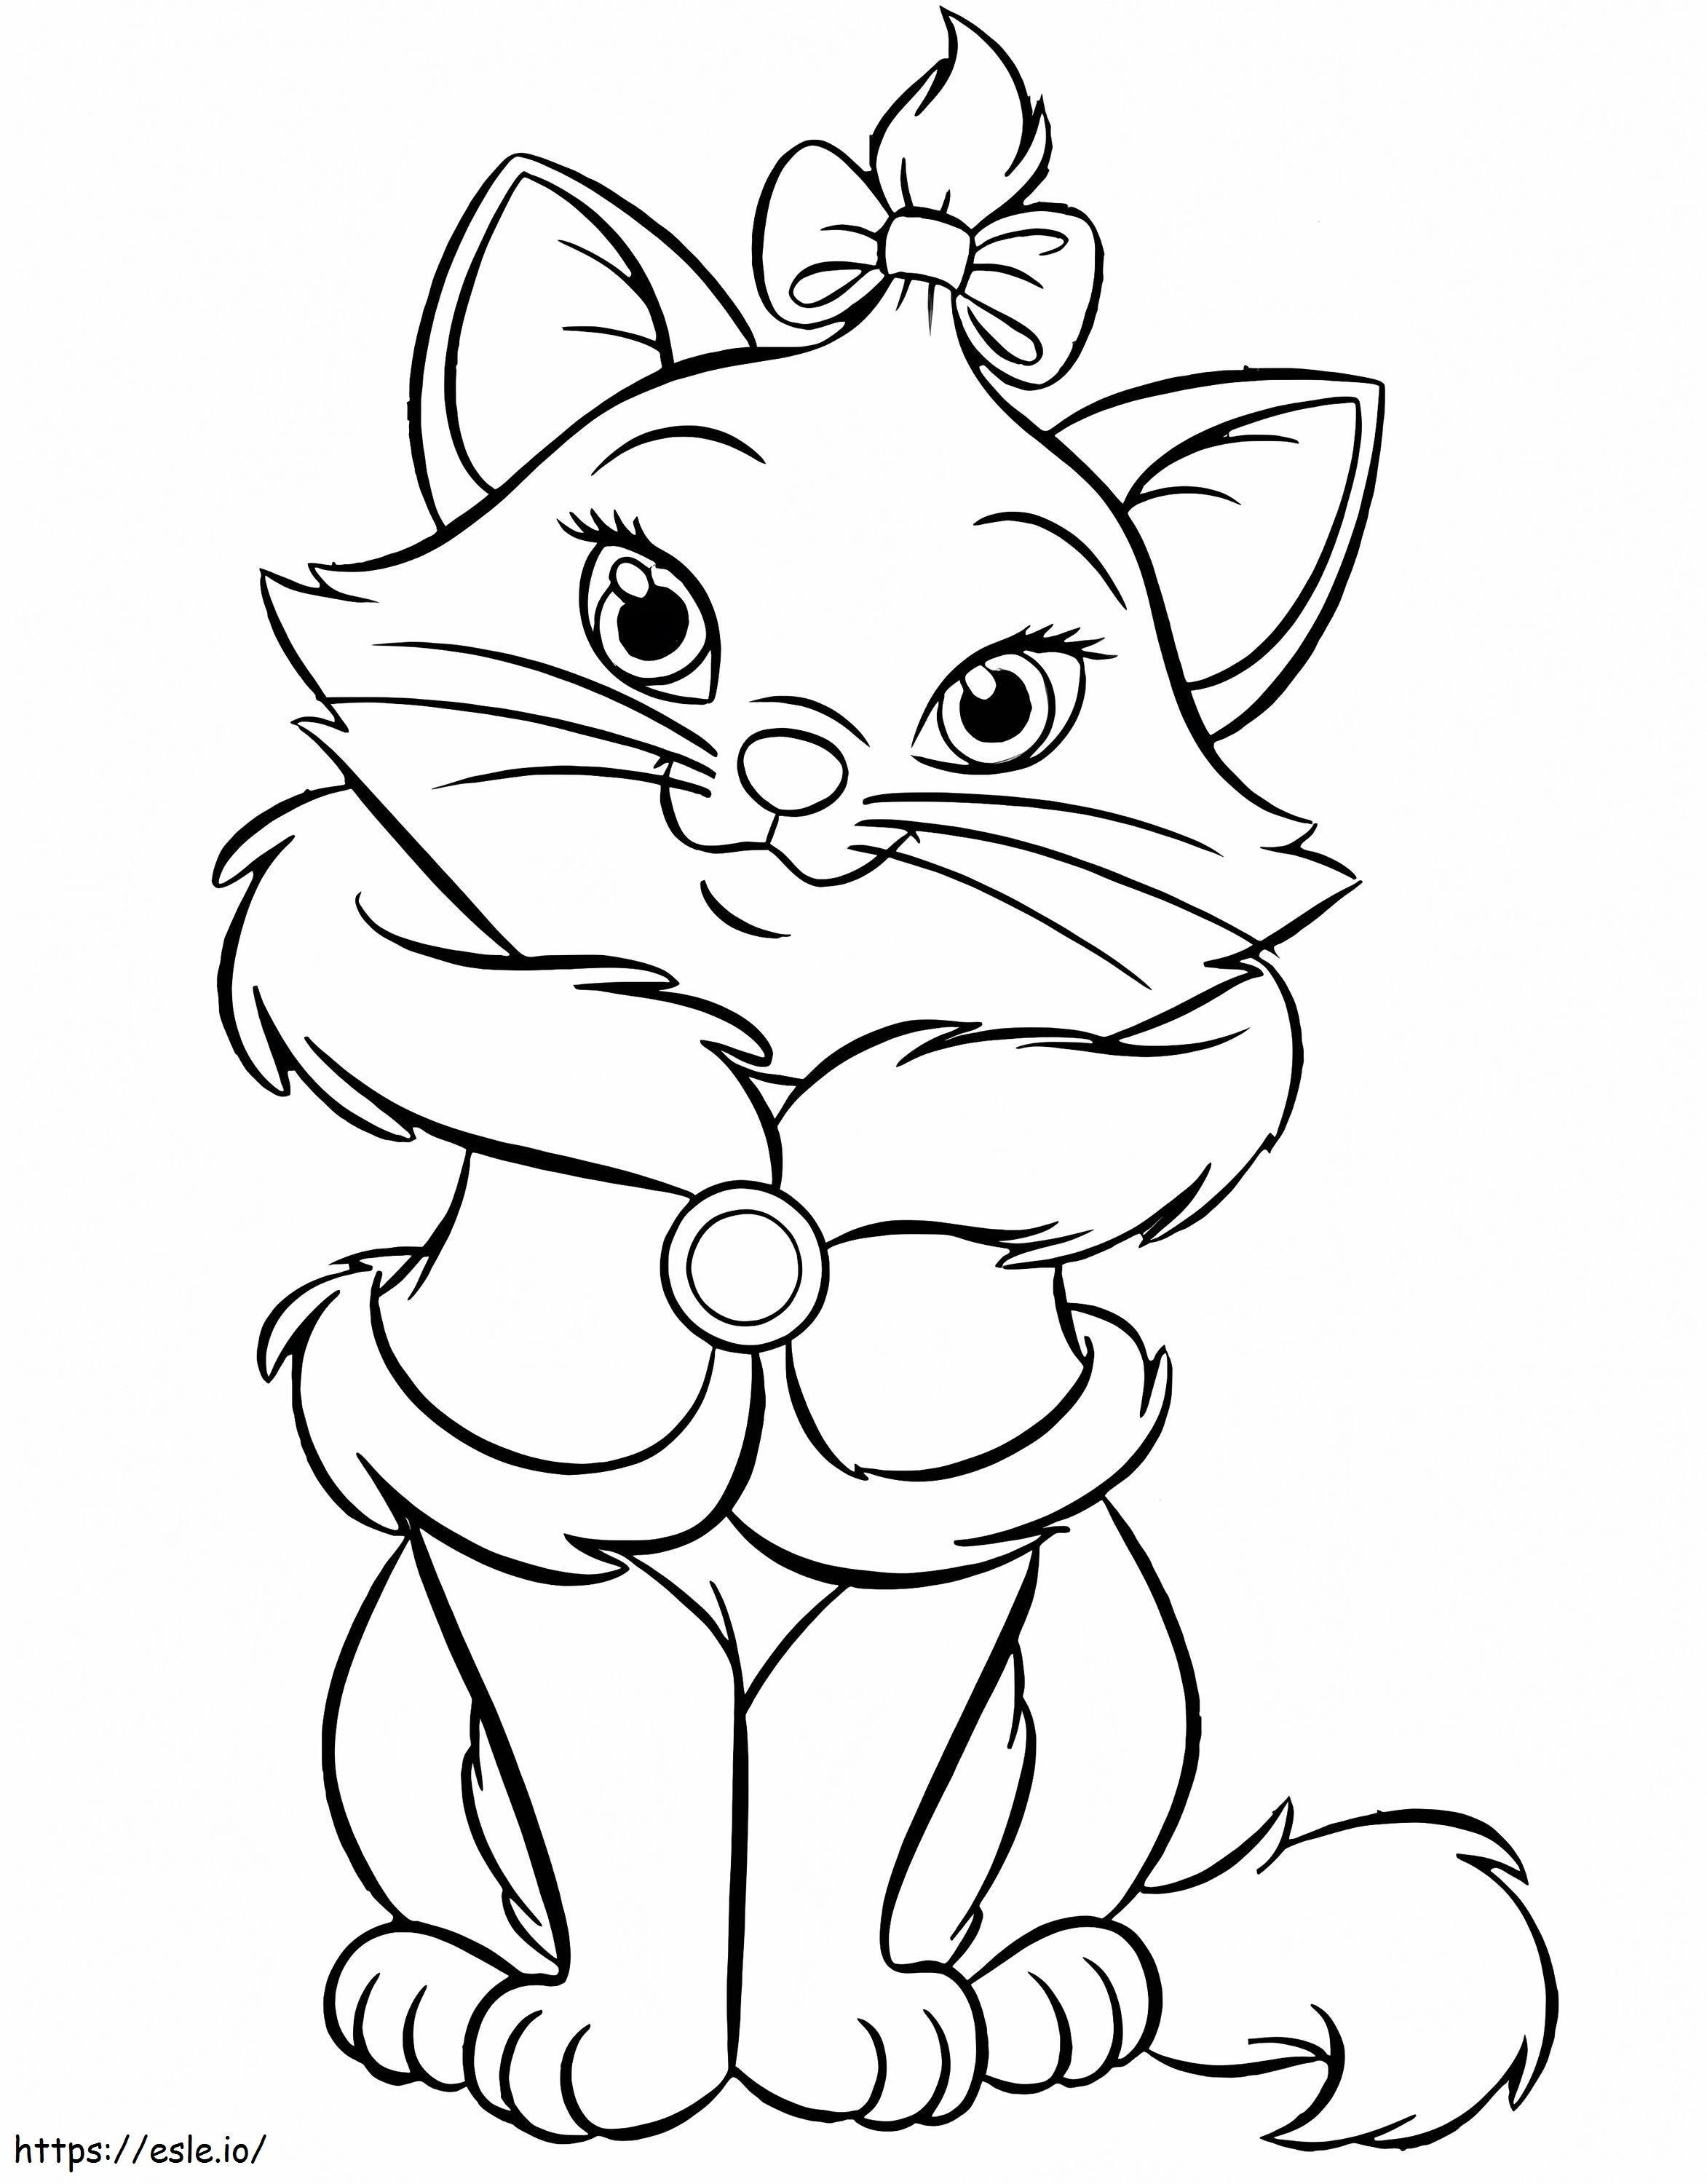 Adorable Marie coloring page